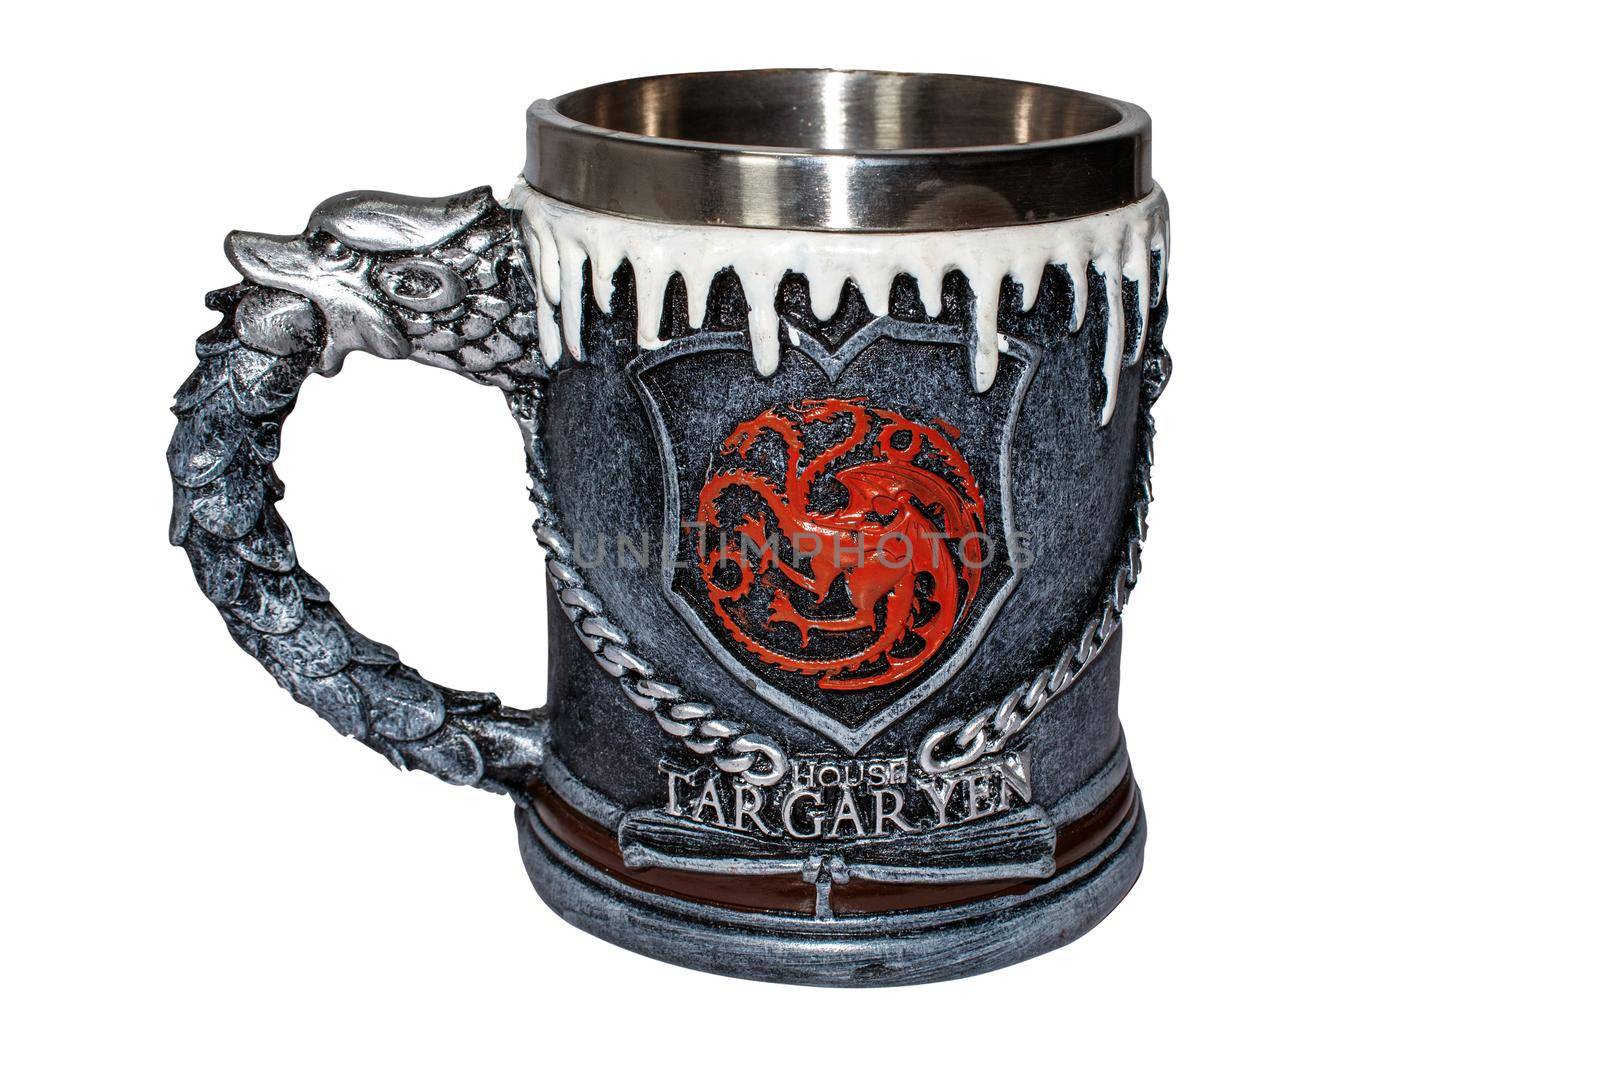 A cup of Game of Thrones with a targaryen cup